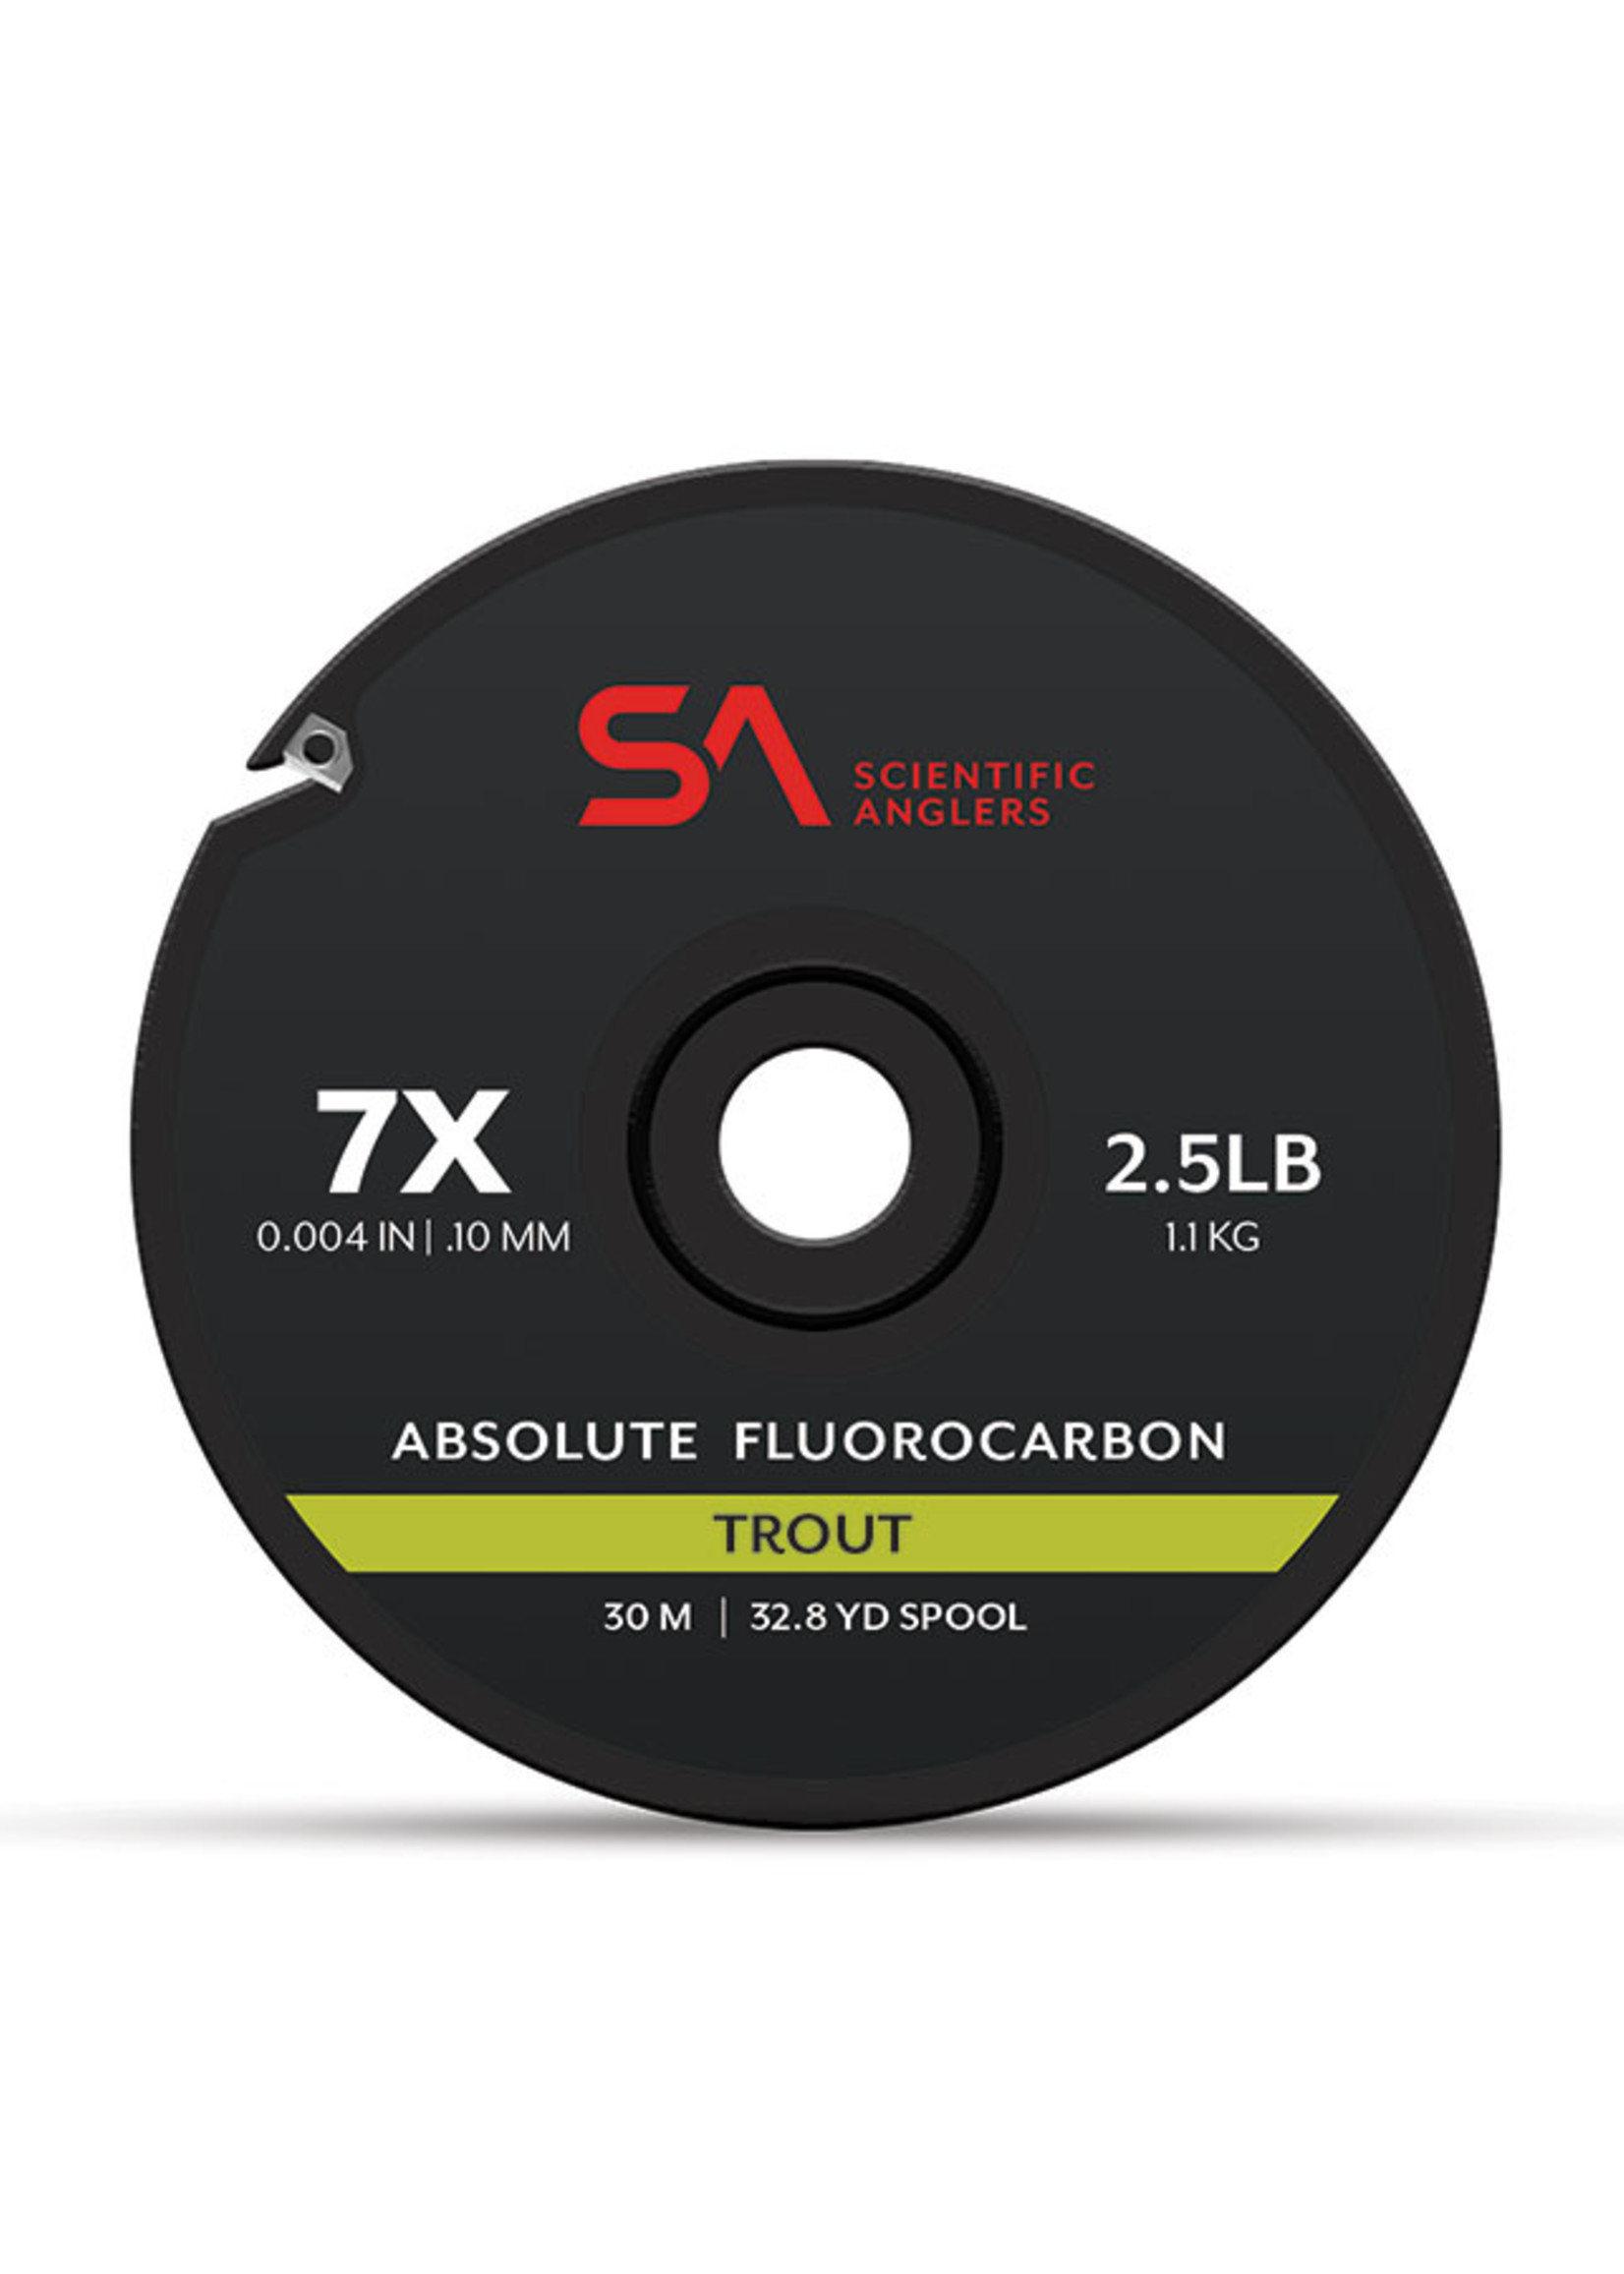 Scientific Anglers SA Trout Series Absolute Fluorocarbon 2x-7x